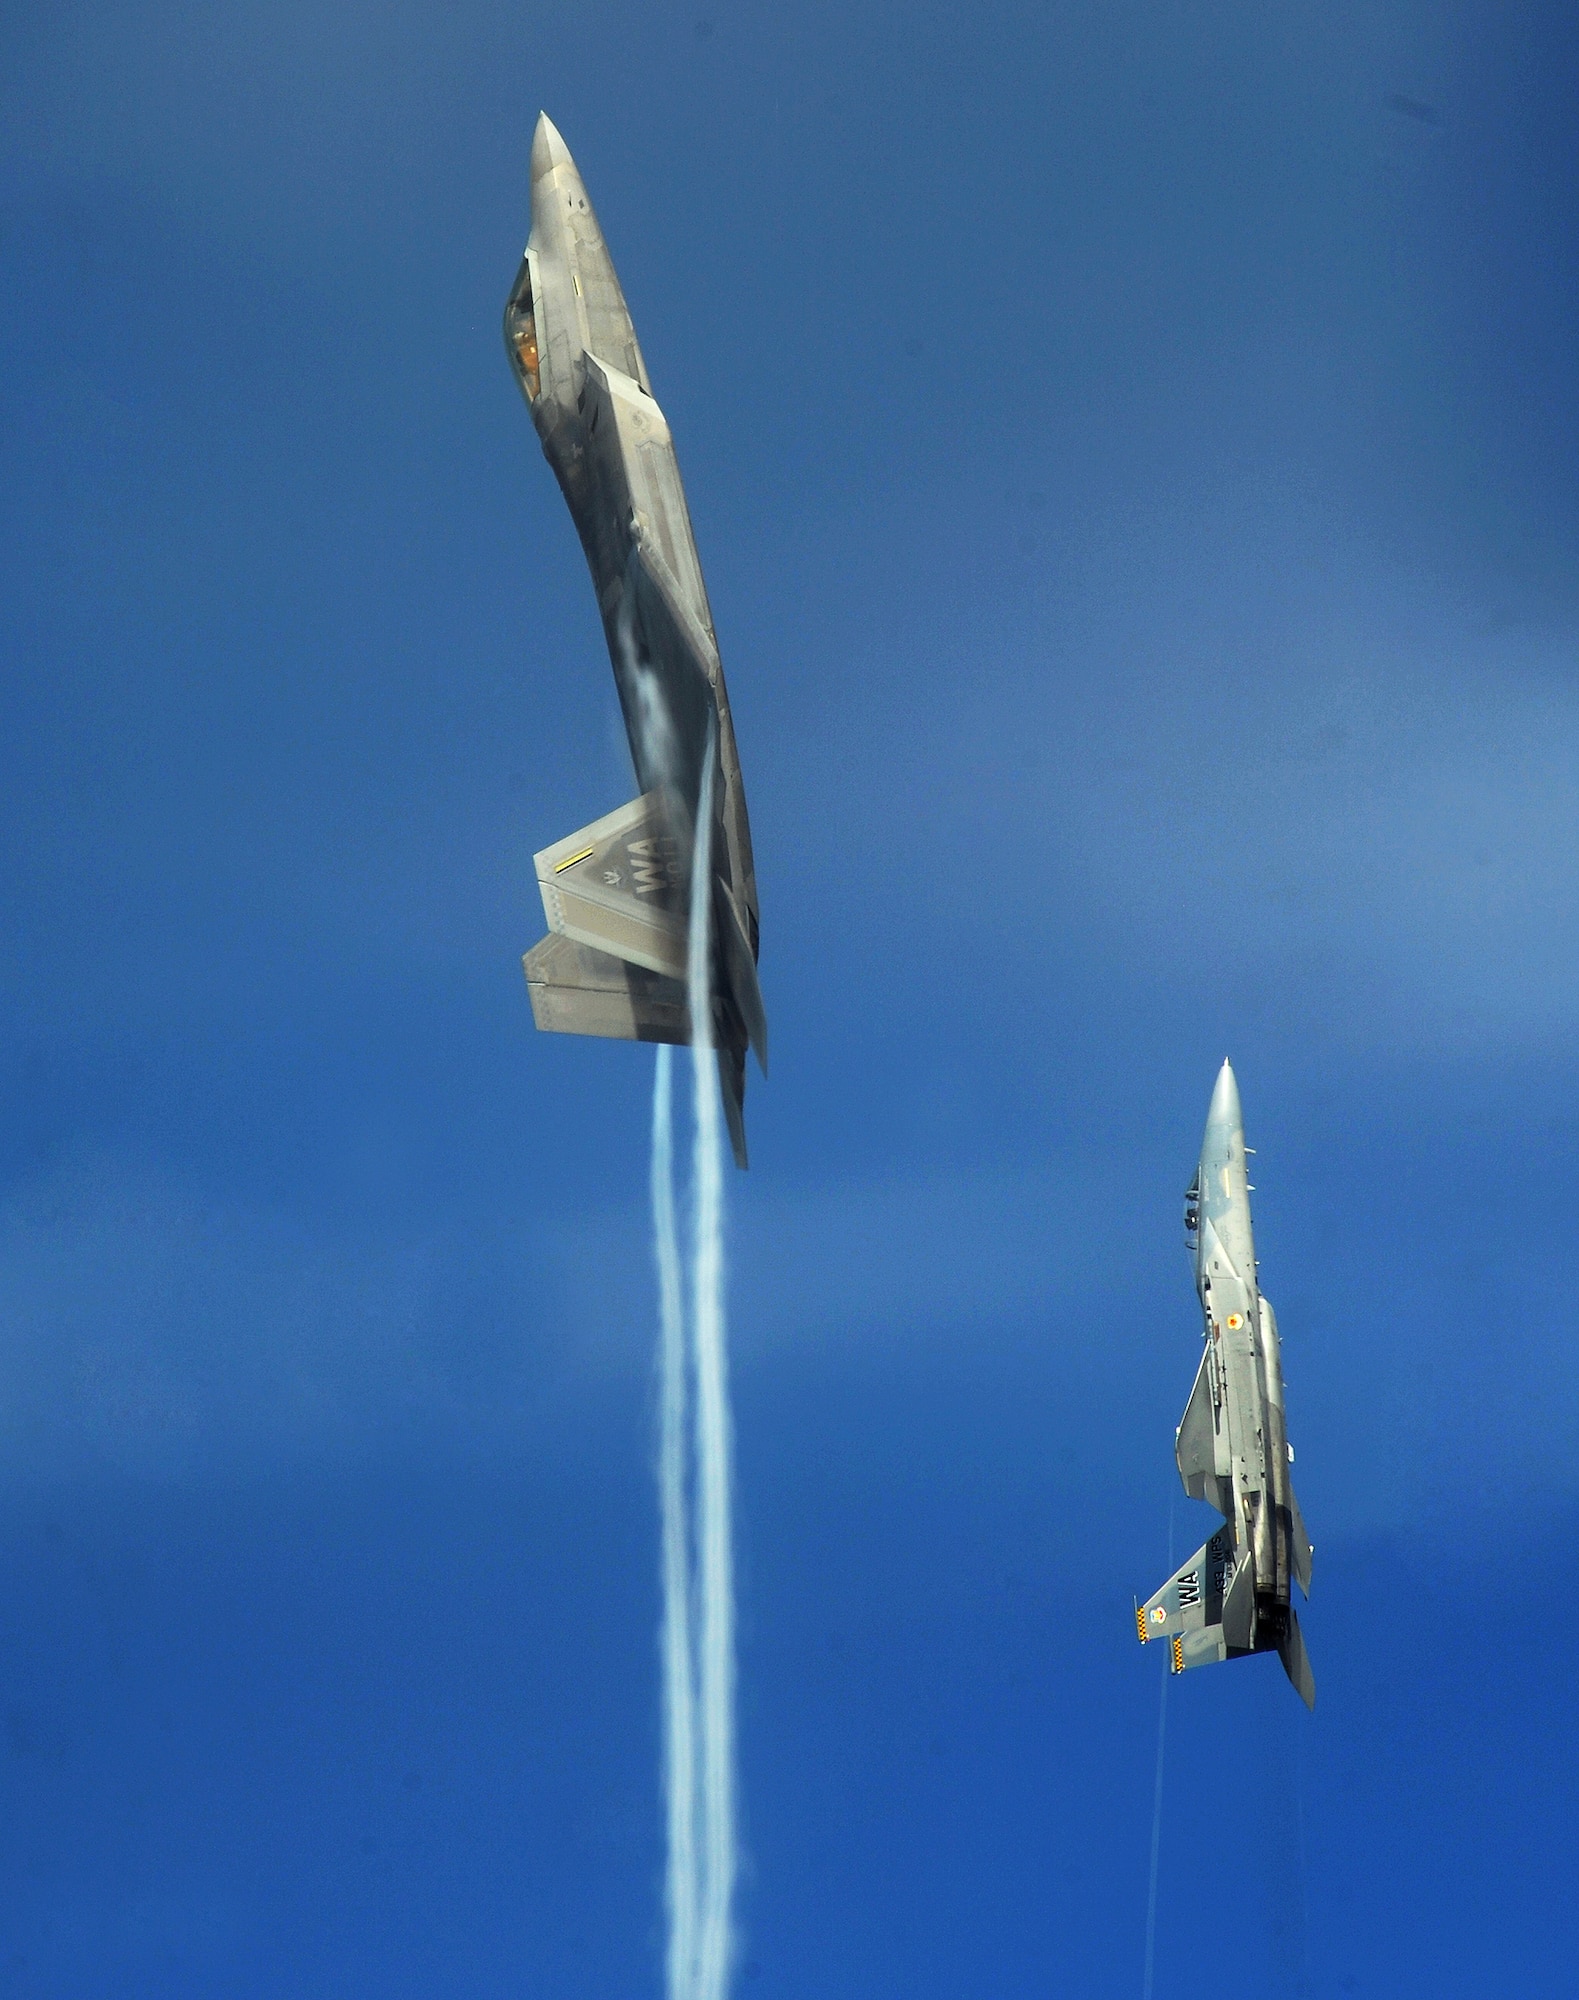 An F-22 Raptor and F-15 Eagle from the U.S. Air Force Weapons School's 433rd Weapons Squadron pull into a vertical climb over the Nevada Test and Training Range July 16, 2010. (U.S. Air Force photo/Master Sgt. Kevin J. Gruenwald)
